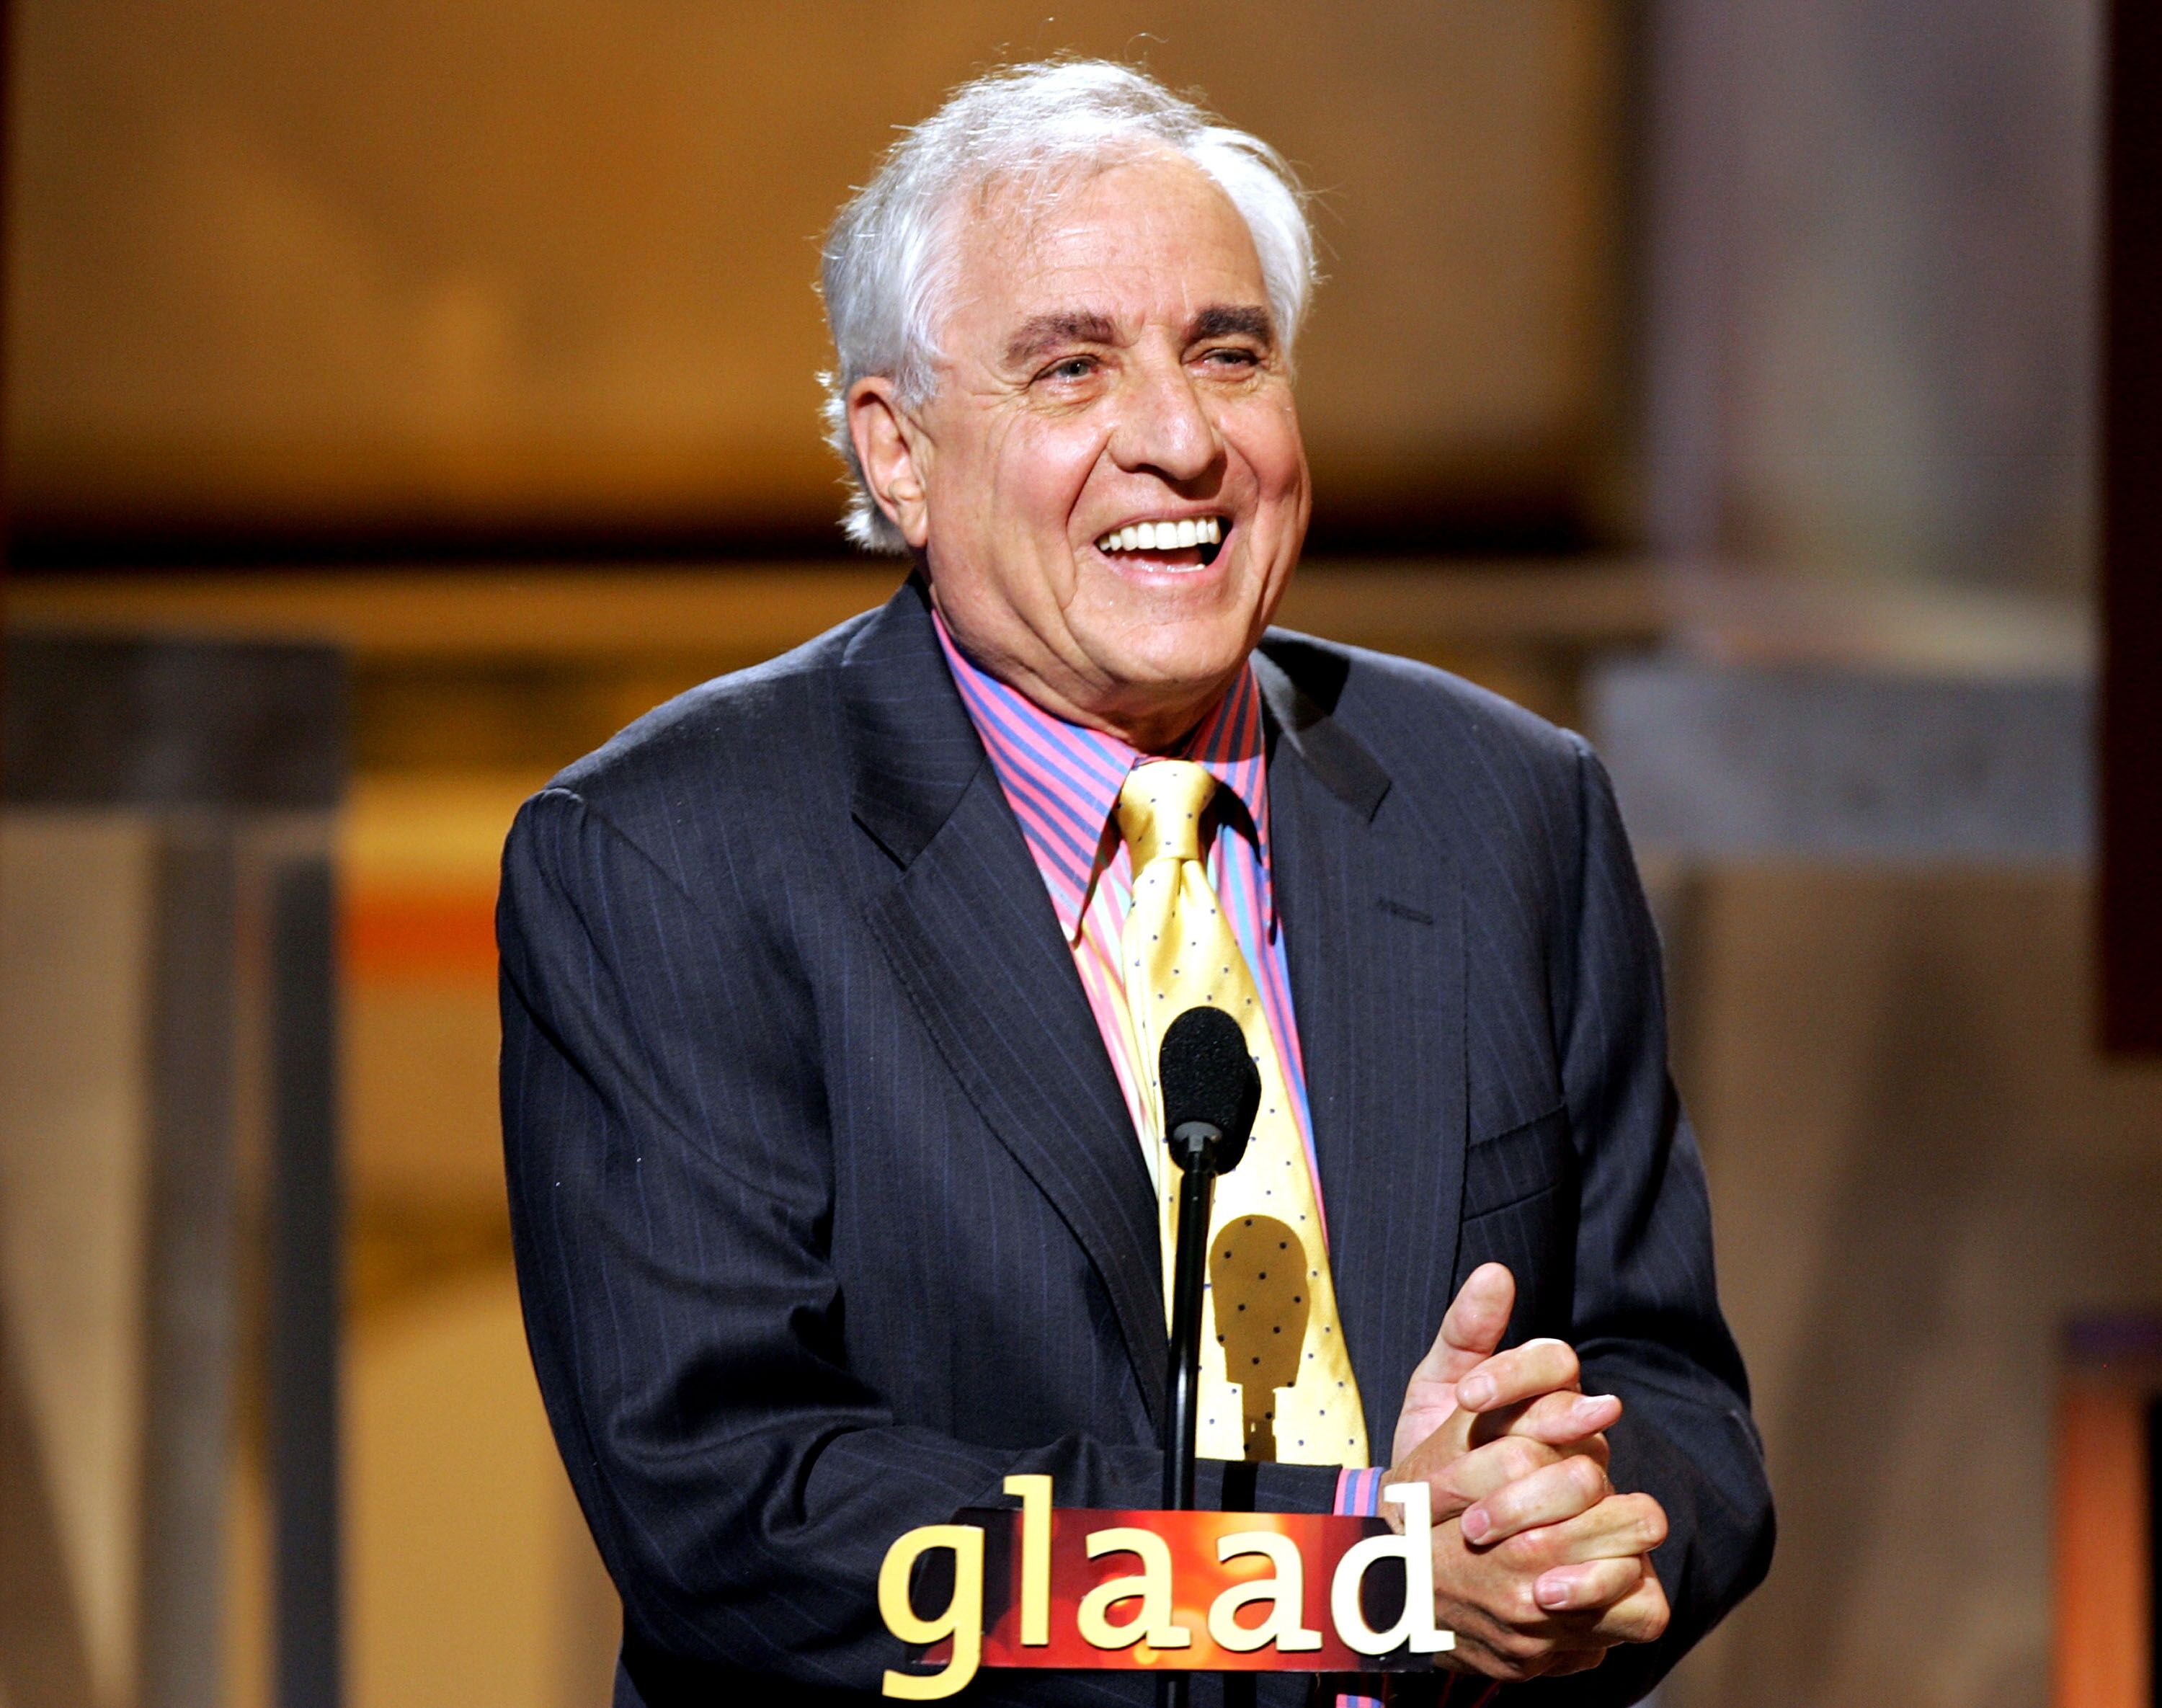 Gary Marshall at the 16th Annual GLAAD Media Awards in 2005 in Hollywood | Source: Getty Images